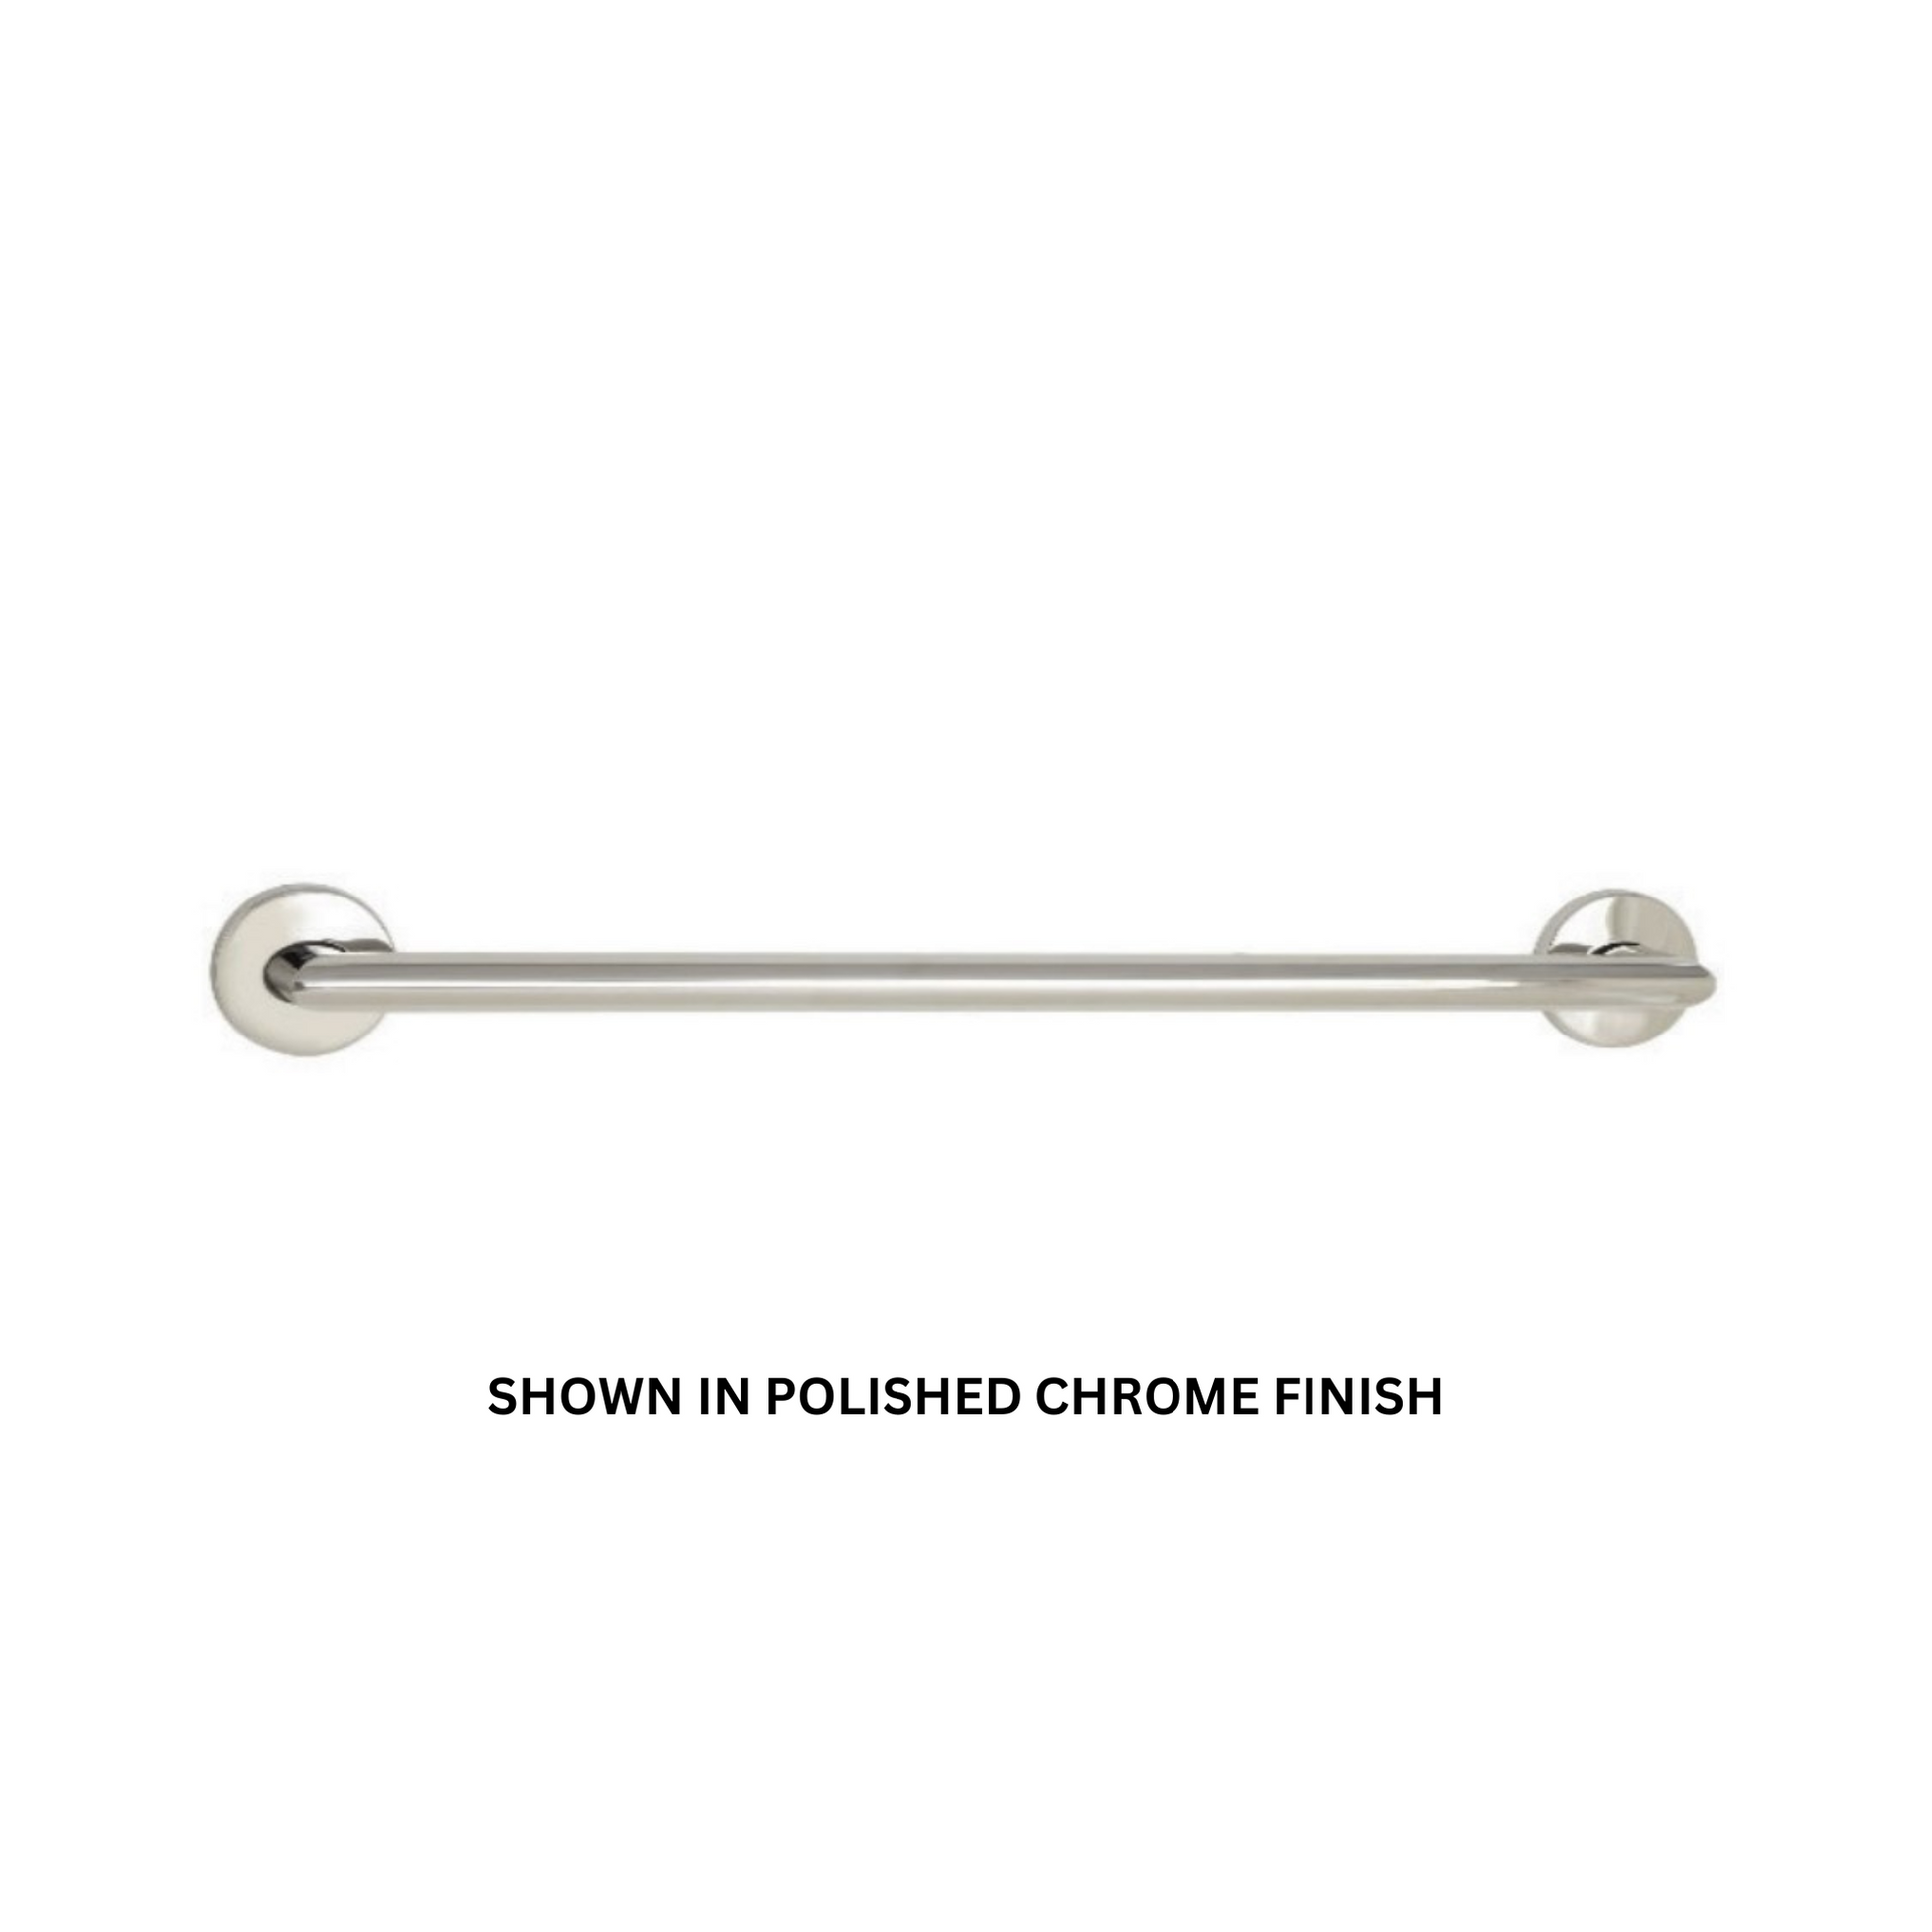 Seachrome Coronado 18" Bronze Powder Coat 1.5" Concealed Flanges Oval Grab Bar With Mitered Corners